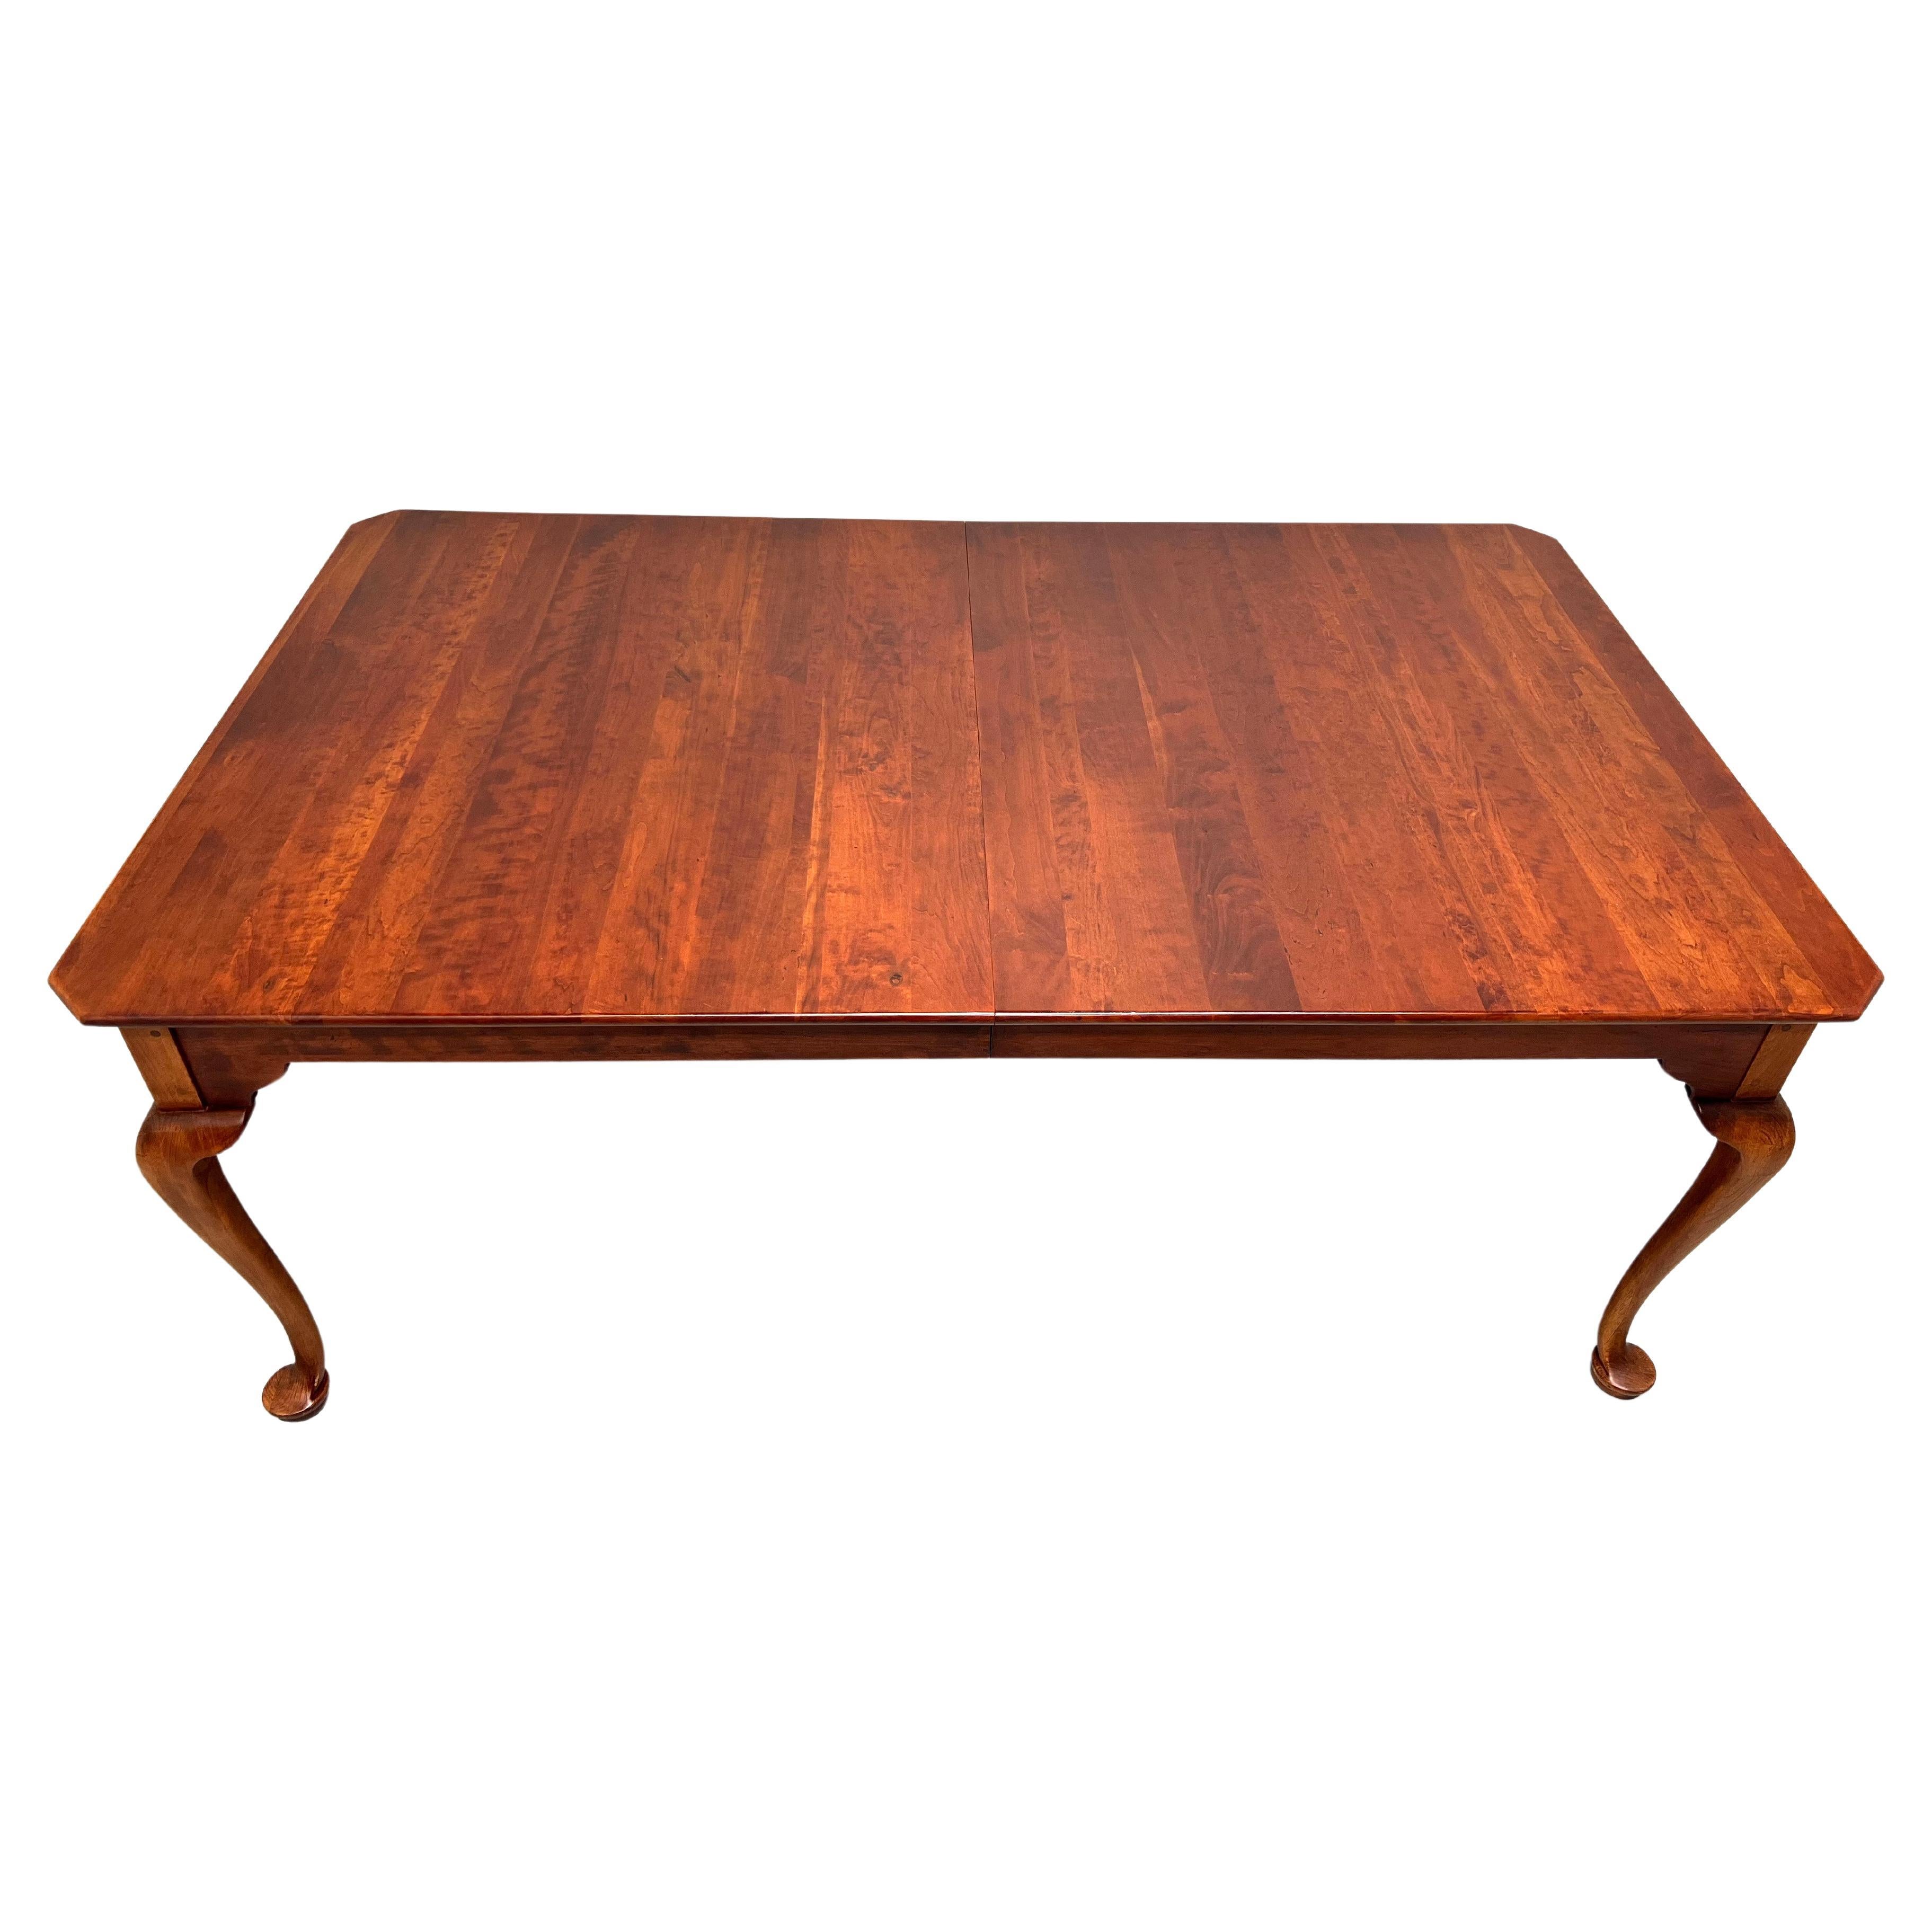 BOB TIMBERLAKE by Lexington Solid Cherry Queen Anne Farmhouse Dining Table